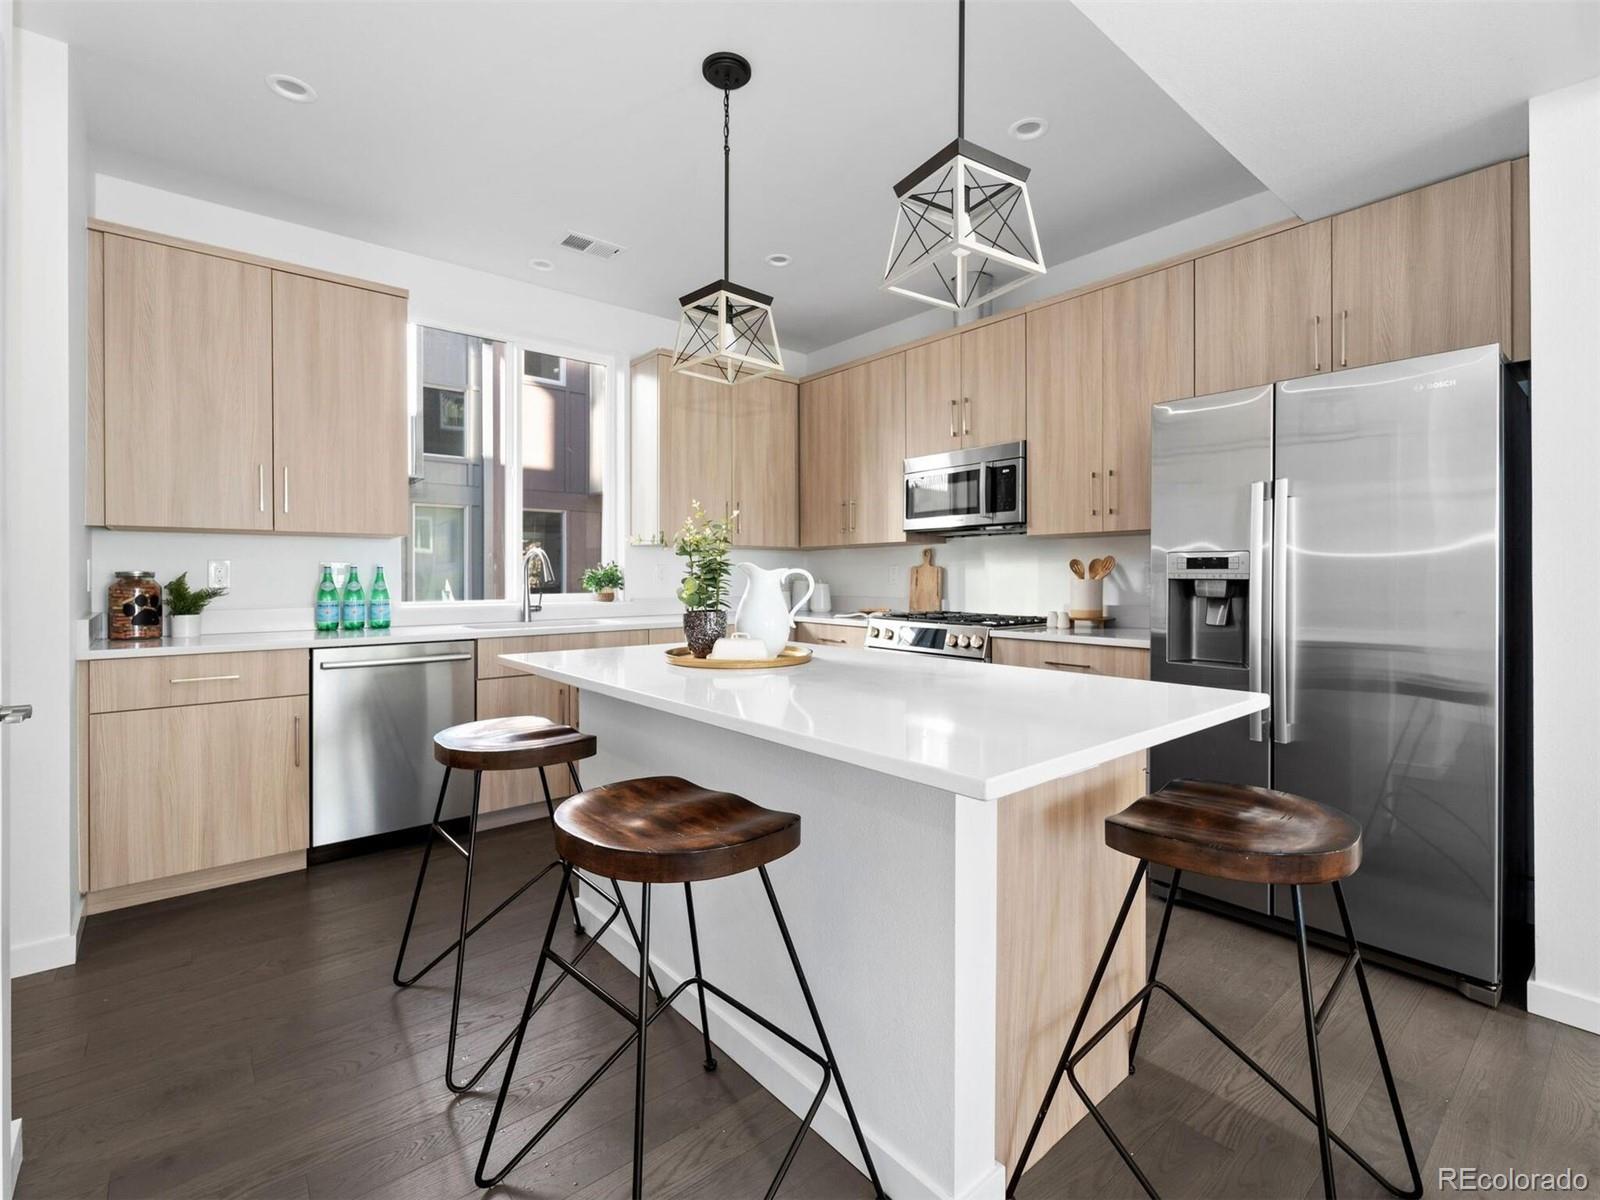 a kitchen with stainless steel appliances granite countertop a refrigerator a sink dishwasher a stove a microwave oven a refrigerator with white cabinets and wooden floor